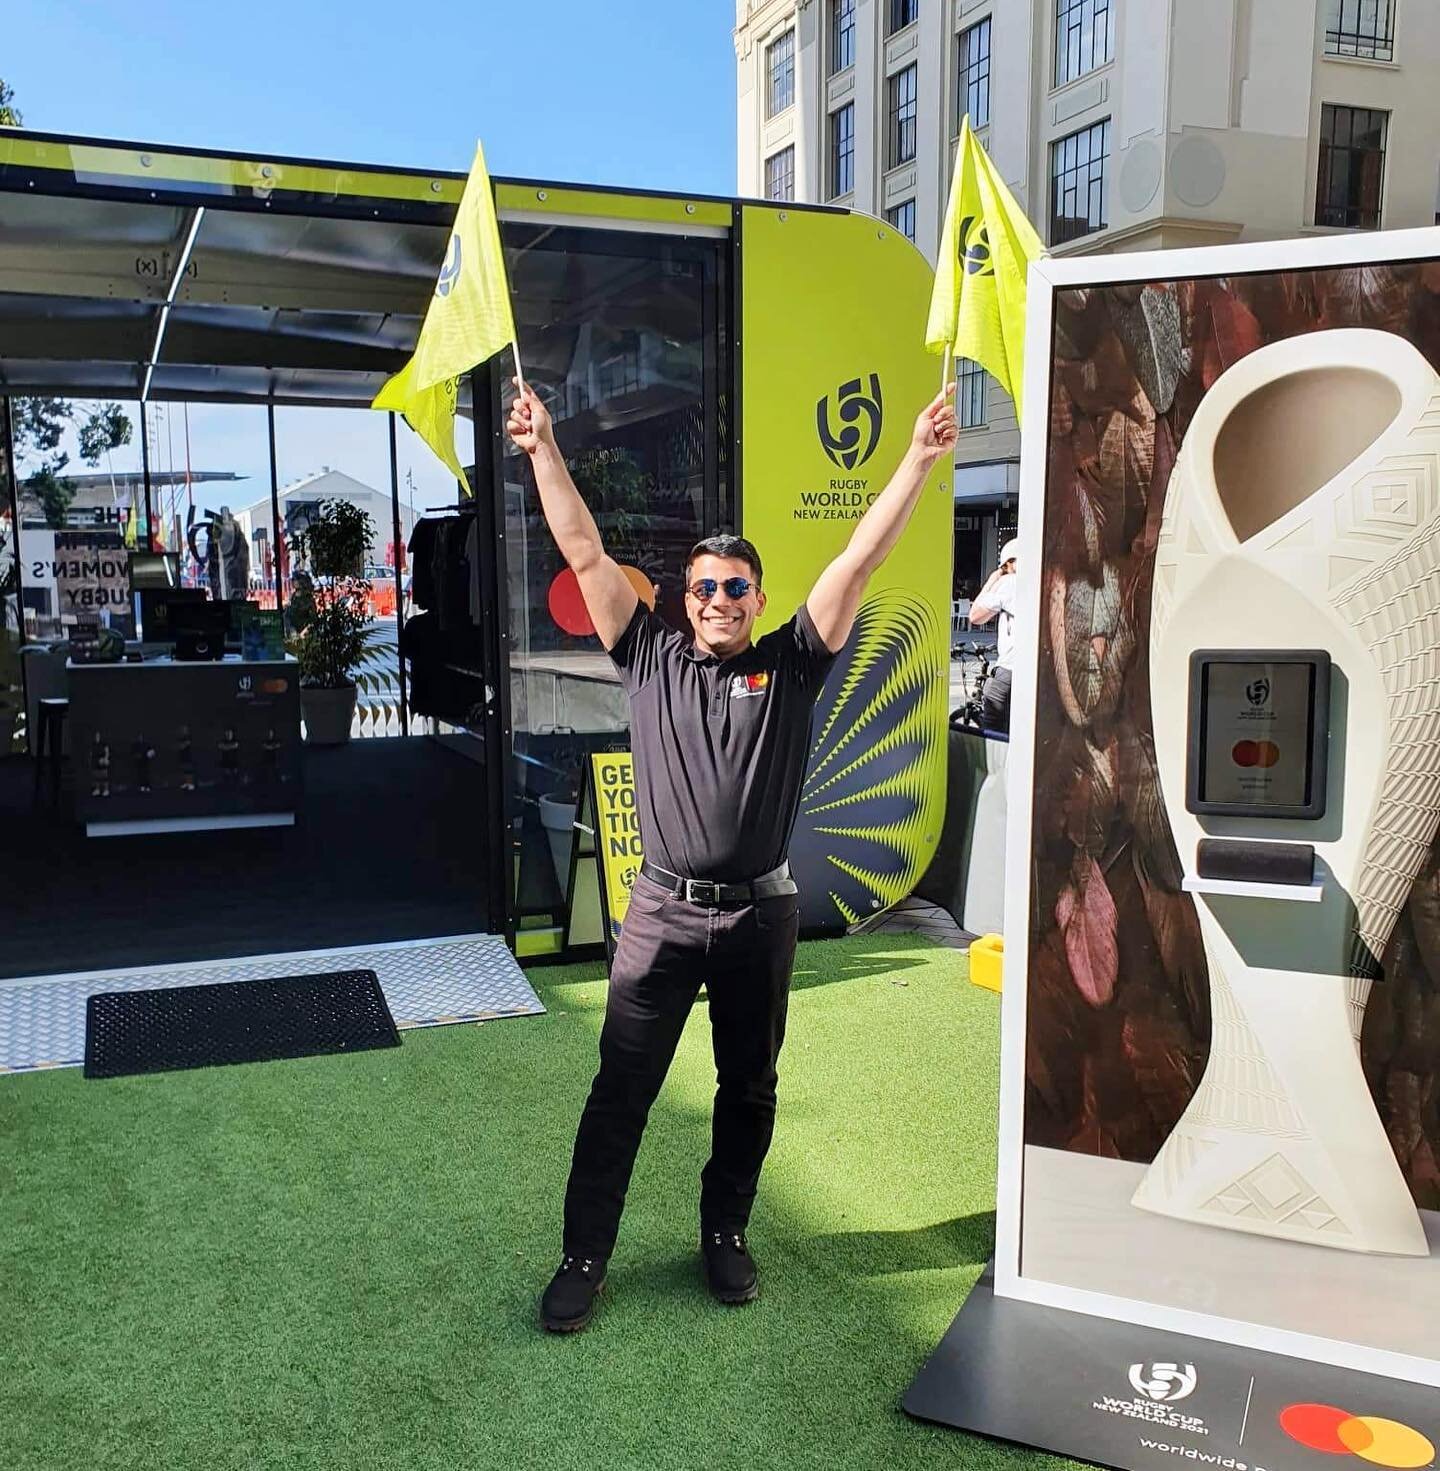 The @blackferns did us SO proud! 
It was a pleasure working with @becausexm to represent Mastercard during the Rugby World Cup 🏆

#RugbyWorldCup2021 #WomensRugby #BlackFerns #MasterCard #BrandActivation